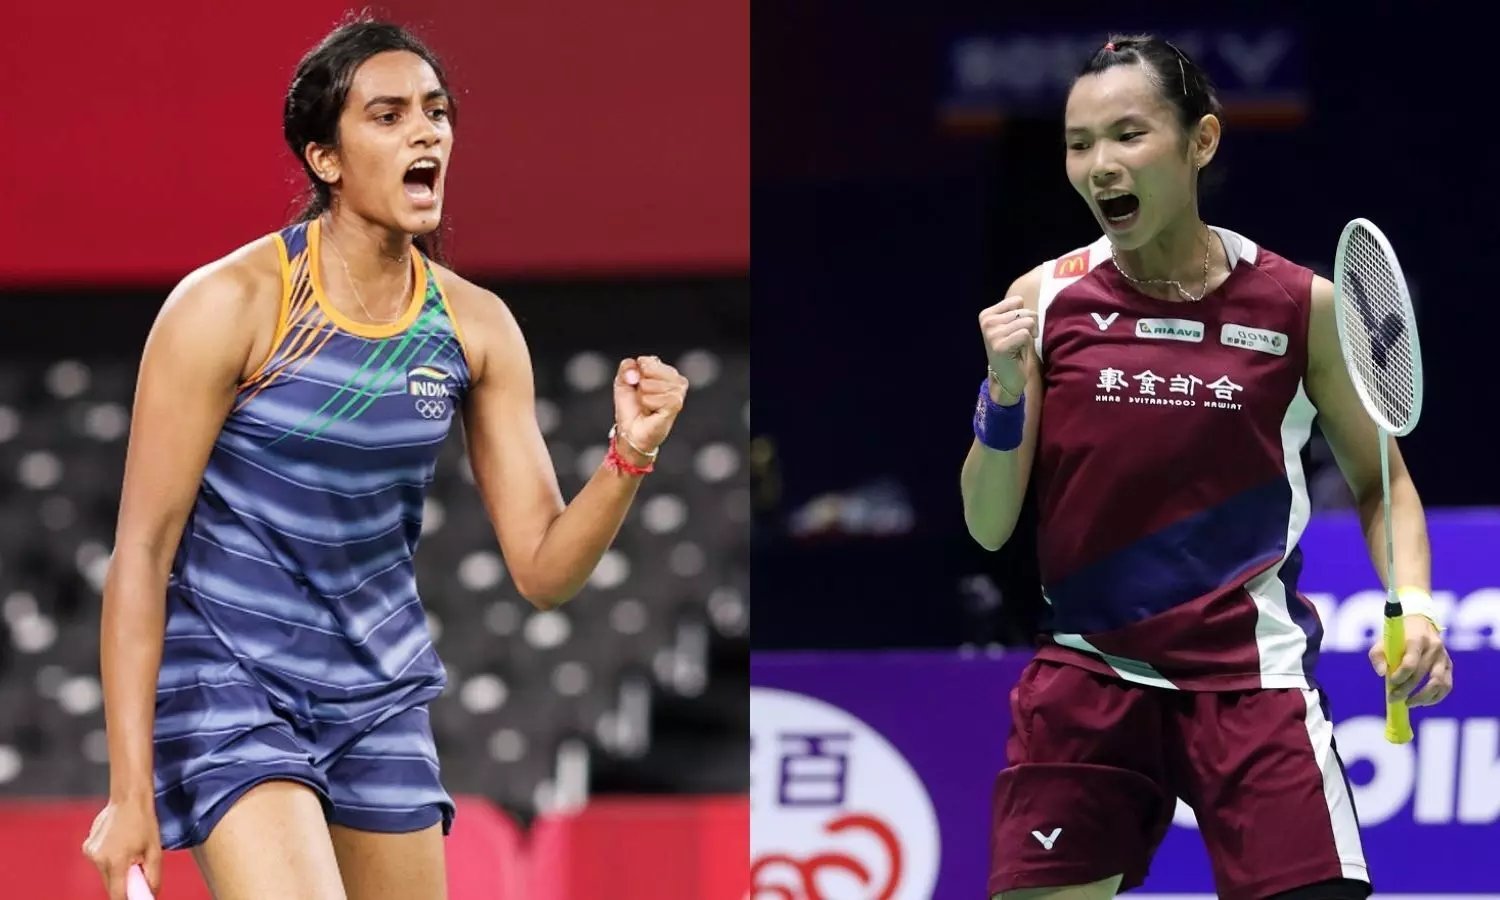 Tokyo Olympics Badminton LIVE Day 8 — PV Sindhus loses super semifinal against Tai Tzu-ying — Updates, scores, results, blog